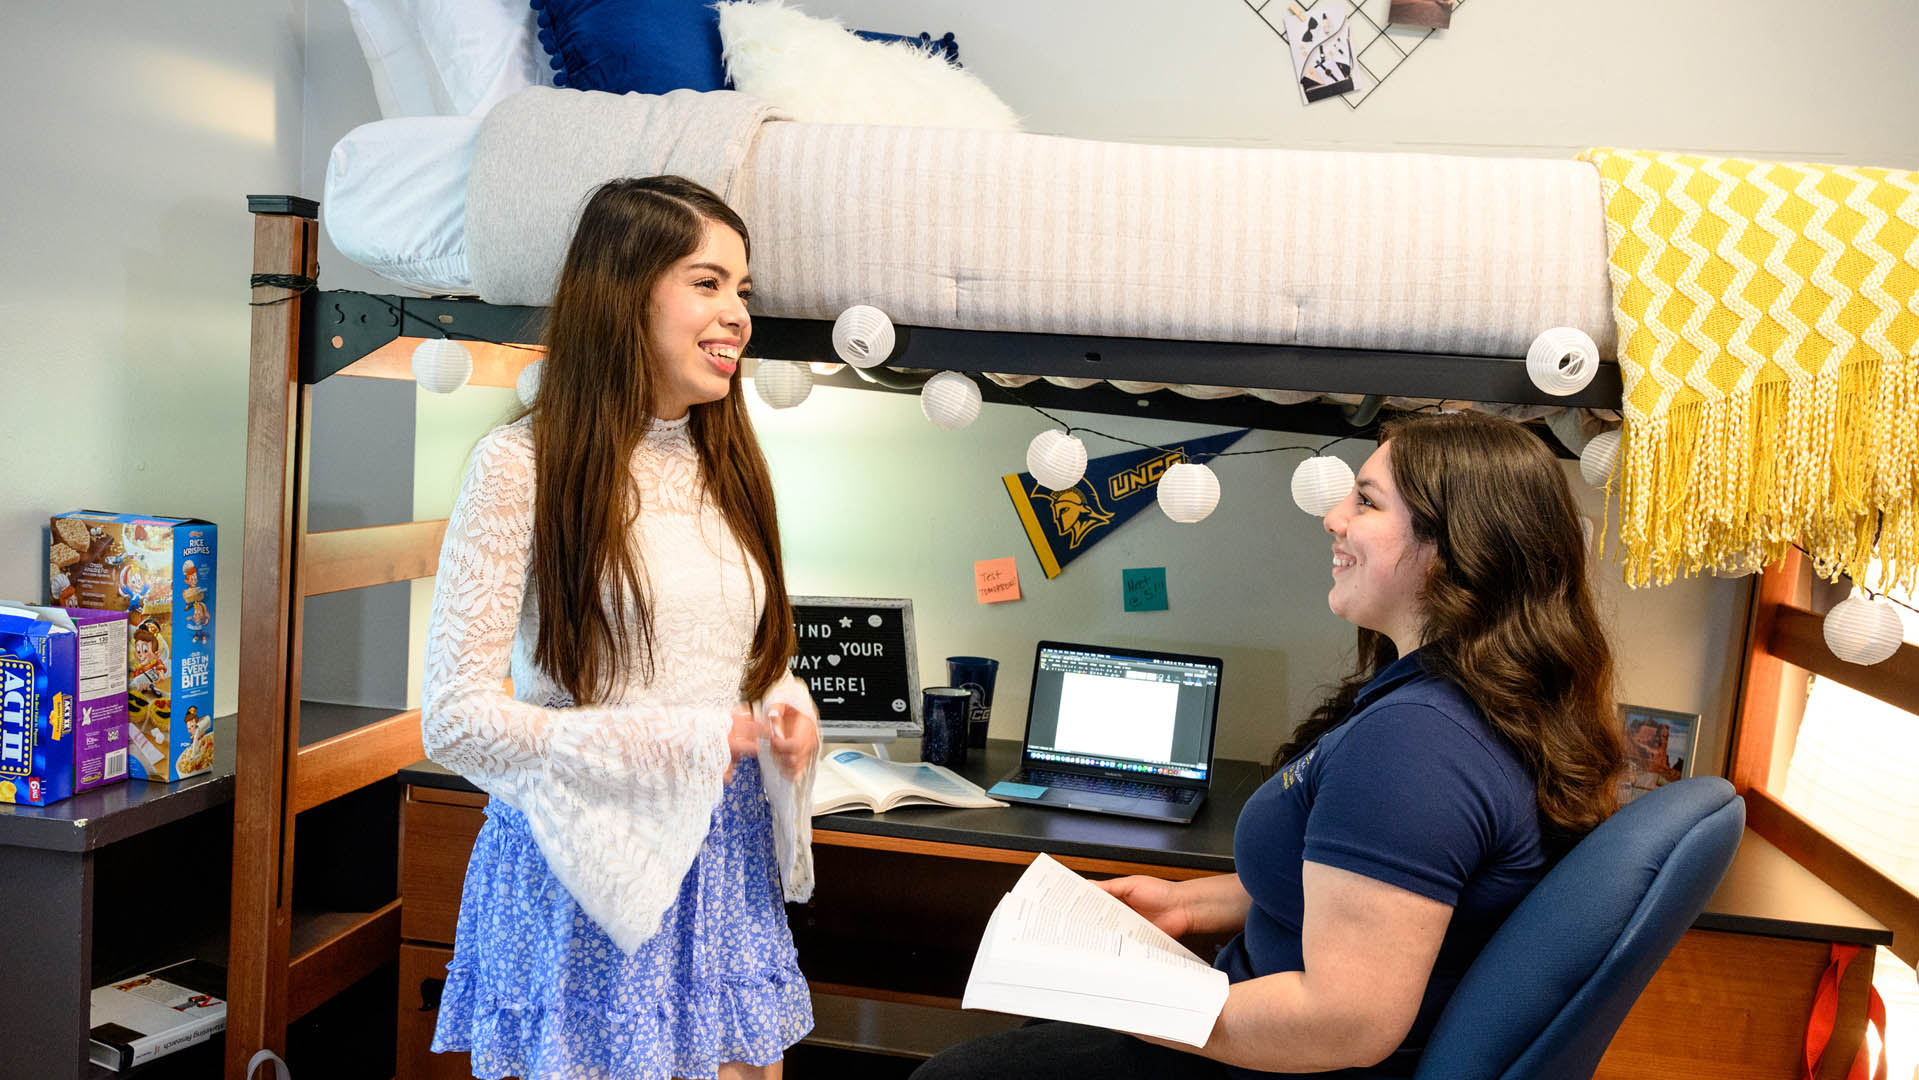 Two female students laugh while talking in their residence hall room.